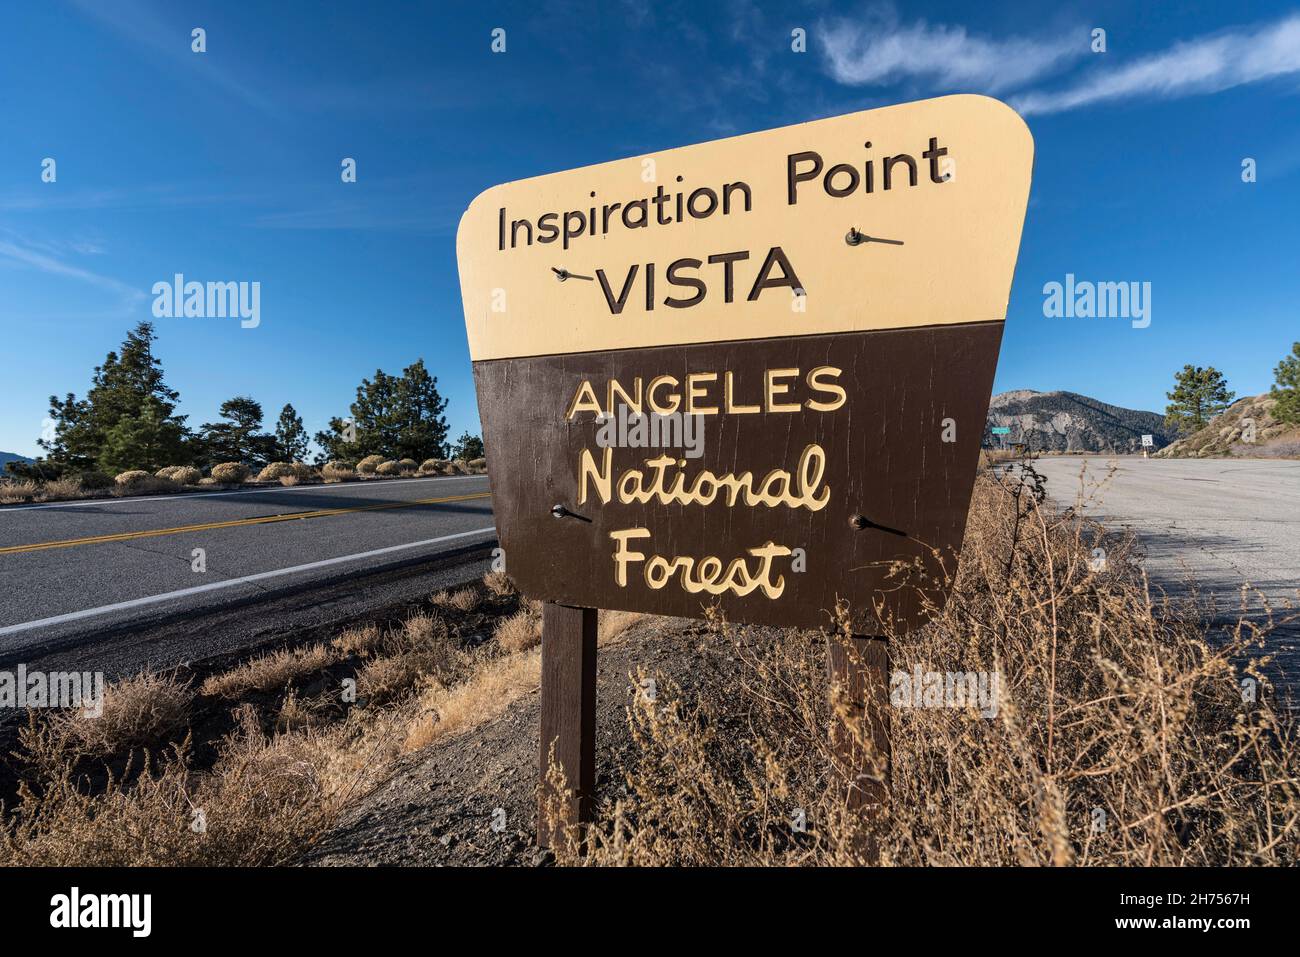 San Gabriel Mountains, California, USA - November 17, 2021:  View of the Angeles National Forest Inspiration Point Vista road sign on Angeles Crest Hi Stock Photo